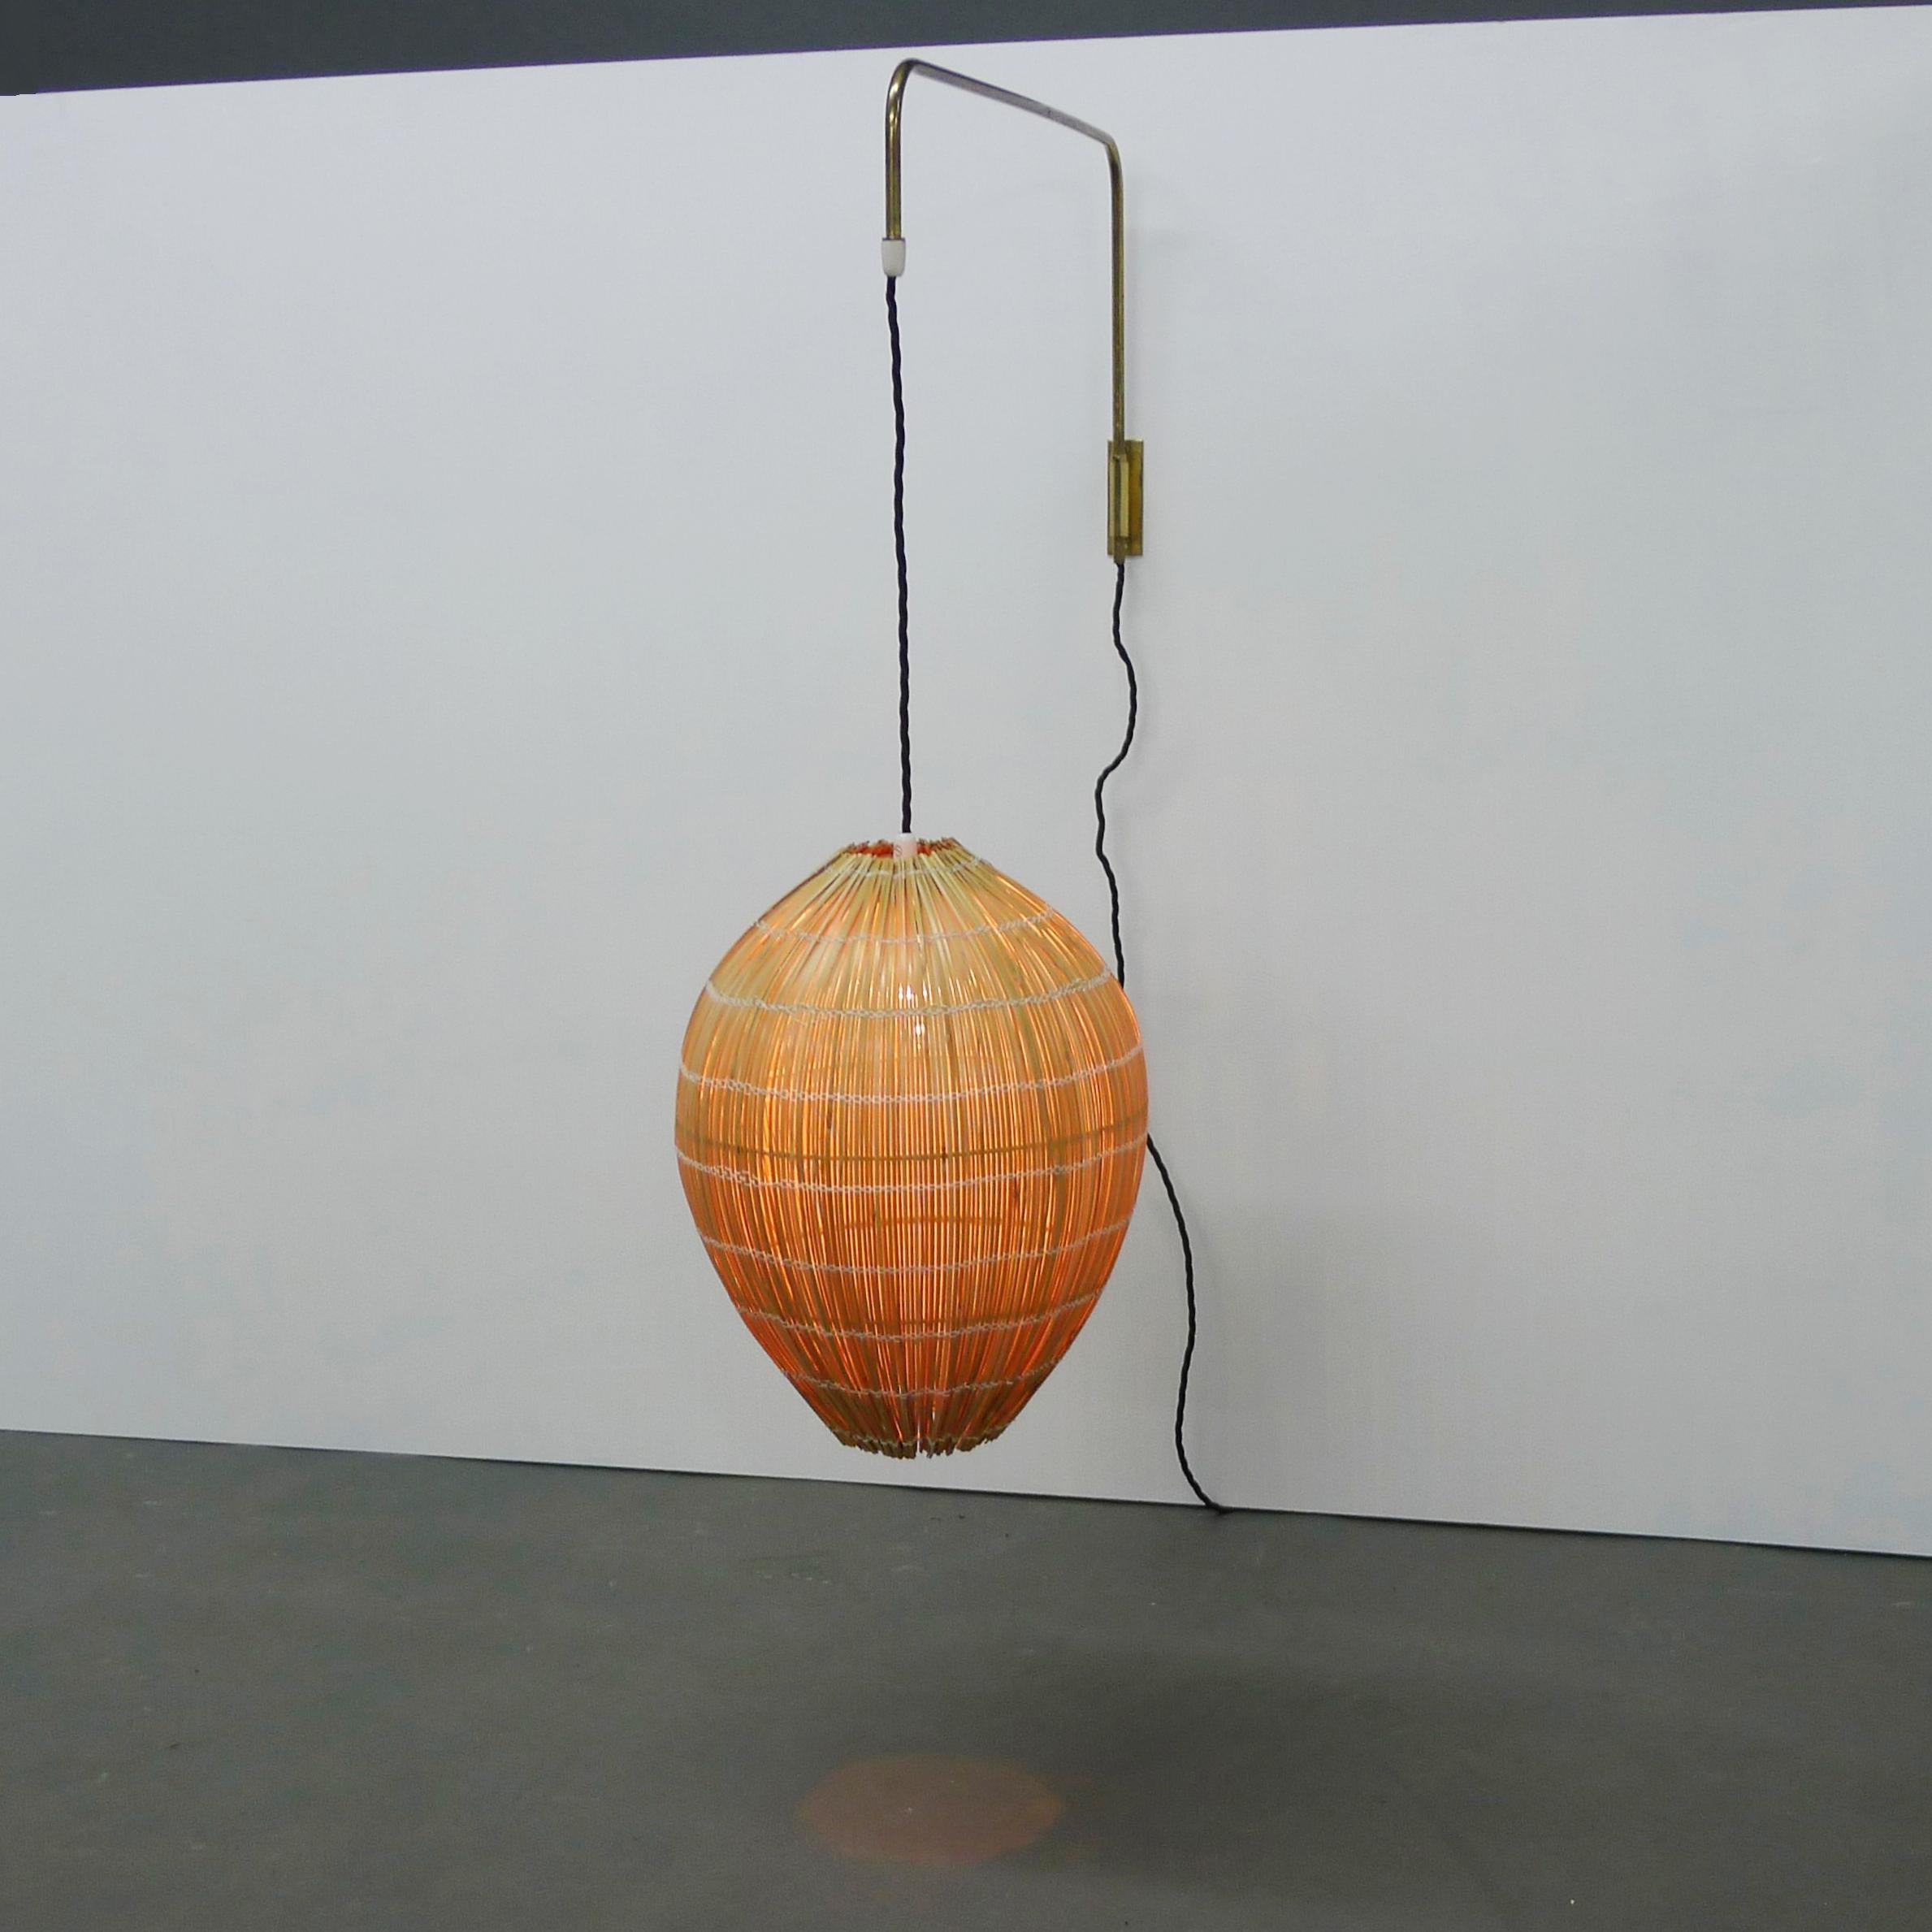 Rare 'Beehive' pendant wall light designed by Paavo Tynell and made by Idman Oy, Vilhonvuorenkatu, Finland, 1940s.

The woven rattan shade is formed in a rigid oval shape by wooden rods, it is suspended with original fabric lead from a tubular brass